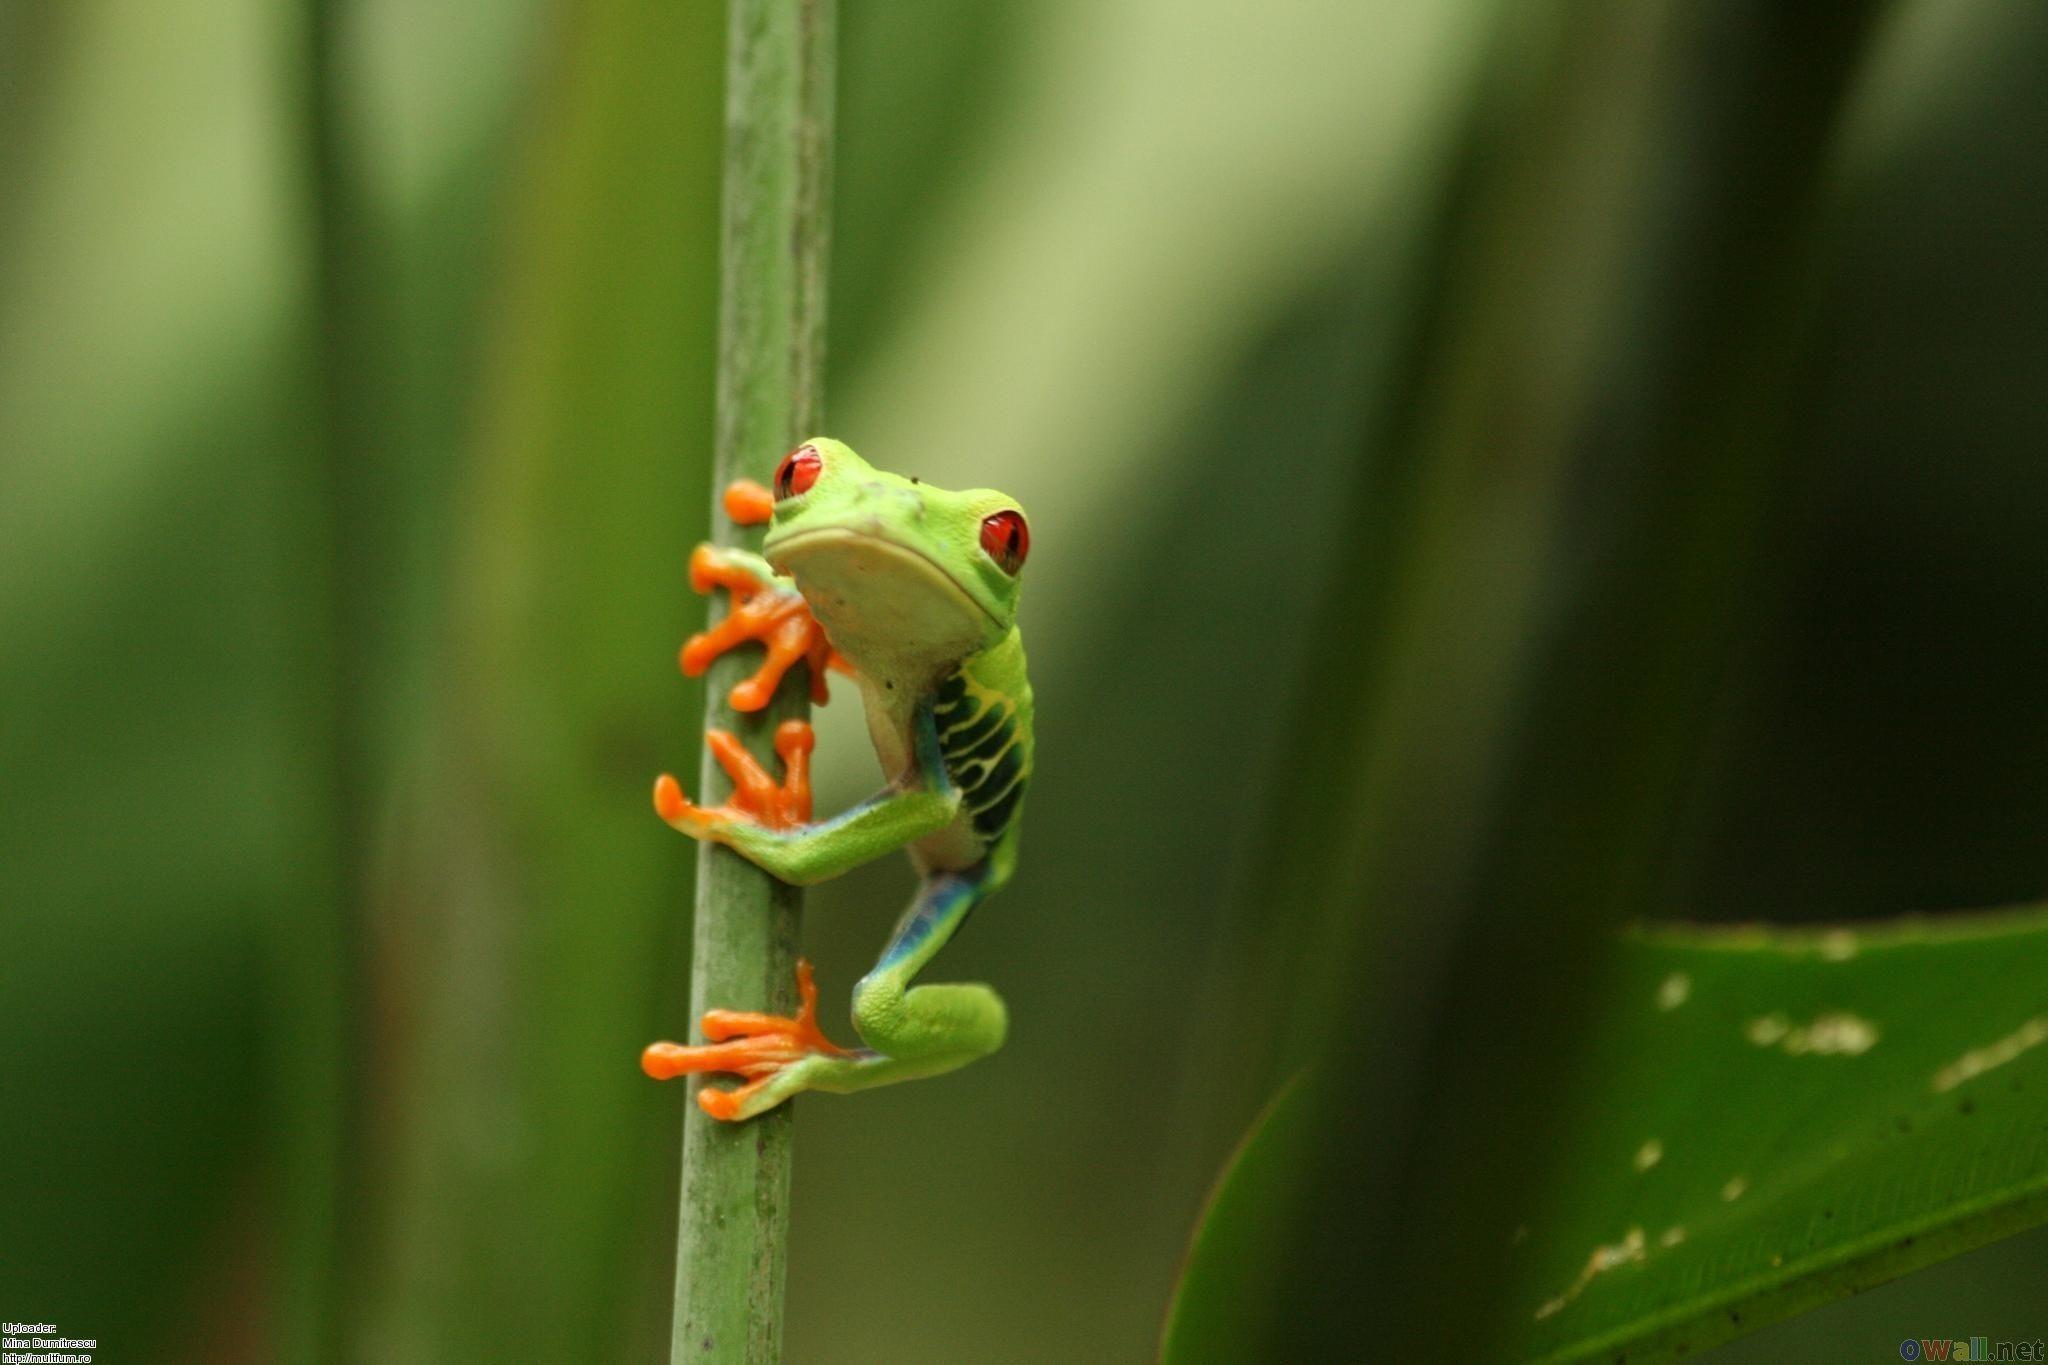 Frog Hd Wallpapers Free Download, Amphibians Wallpapers, Animal